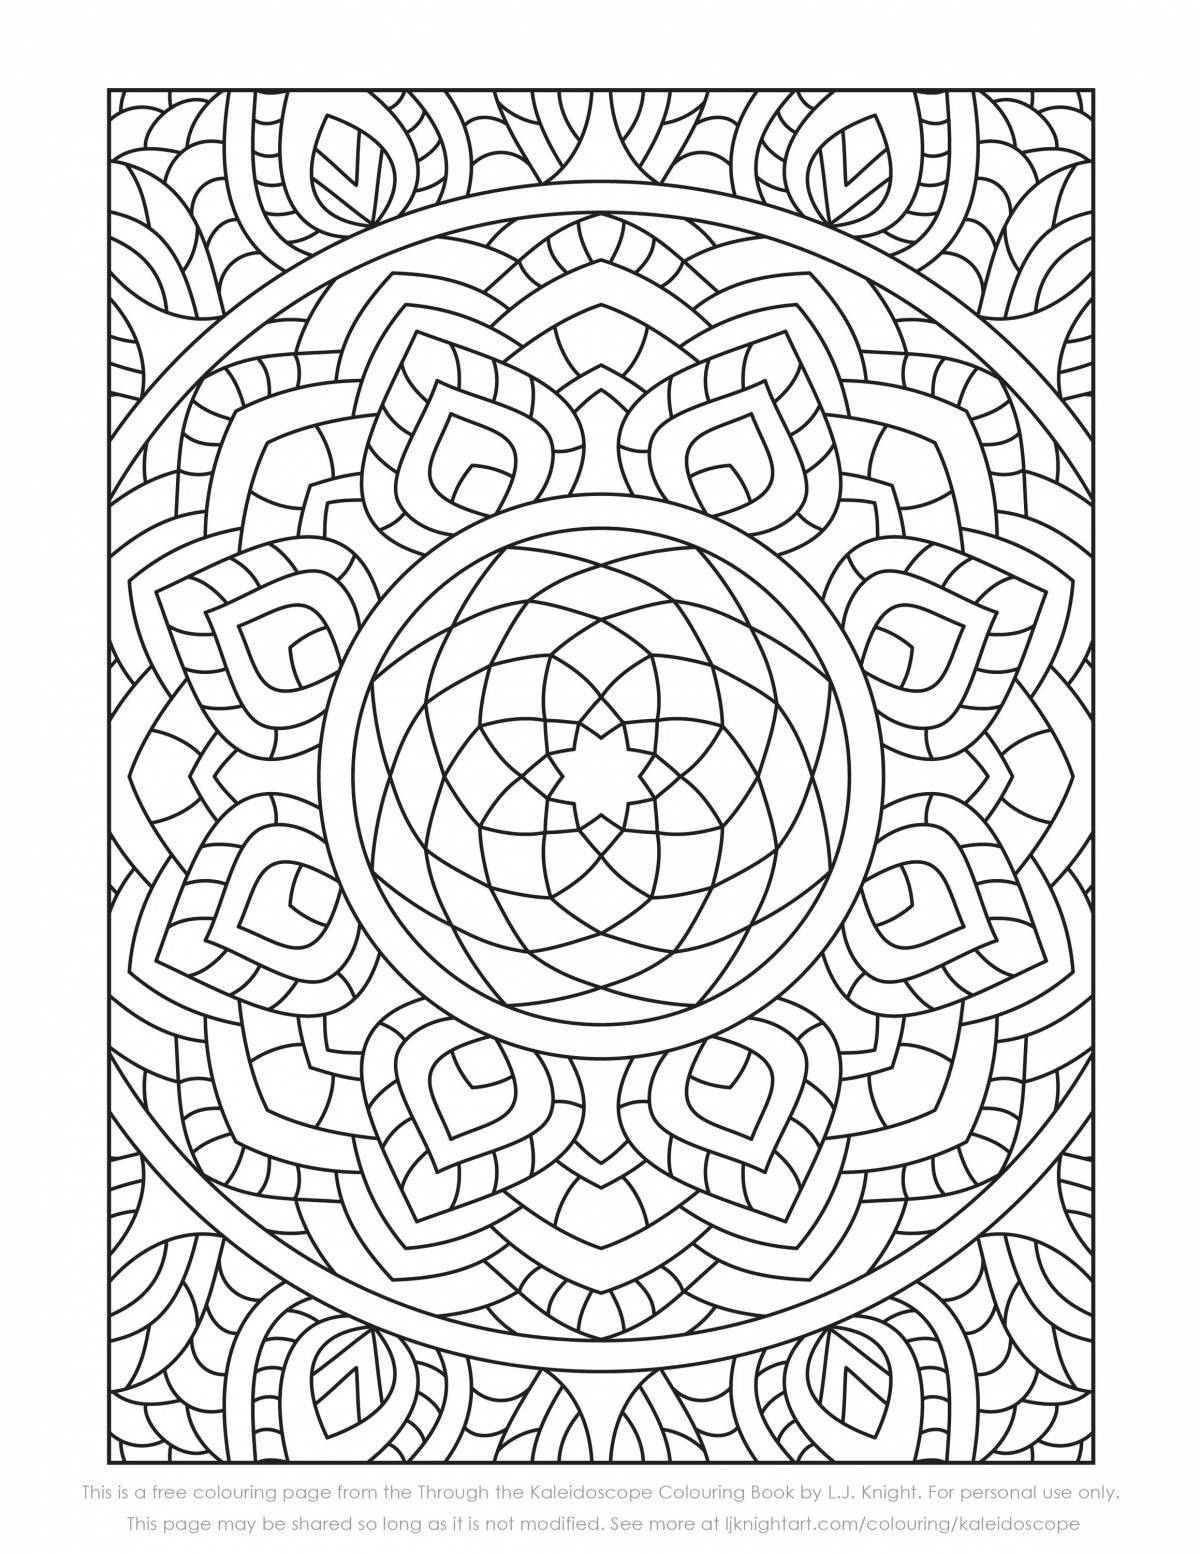 Colorful kaleidoscope coloring book